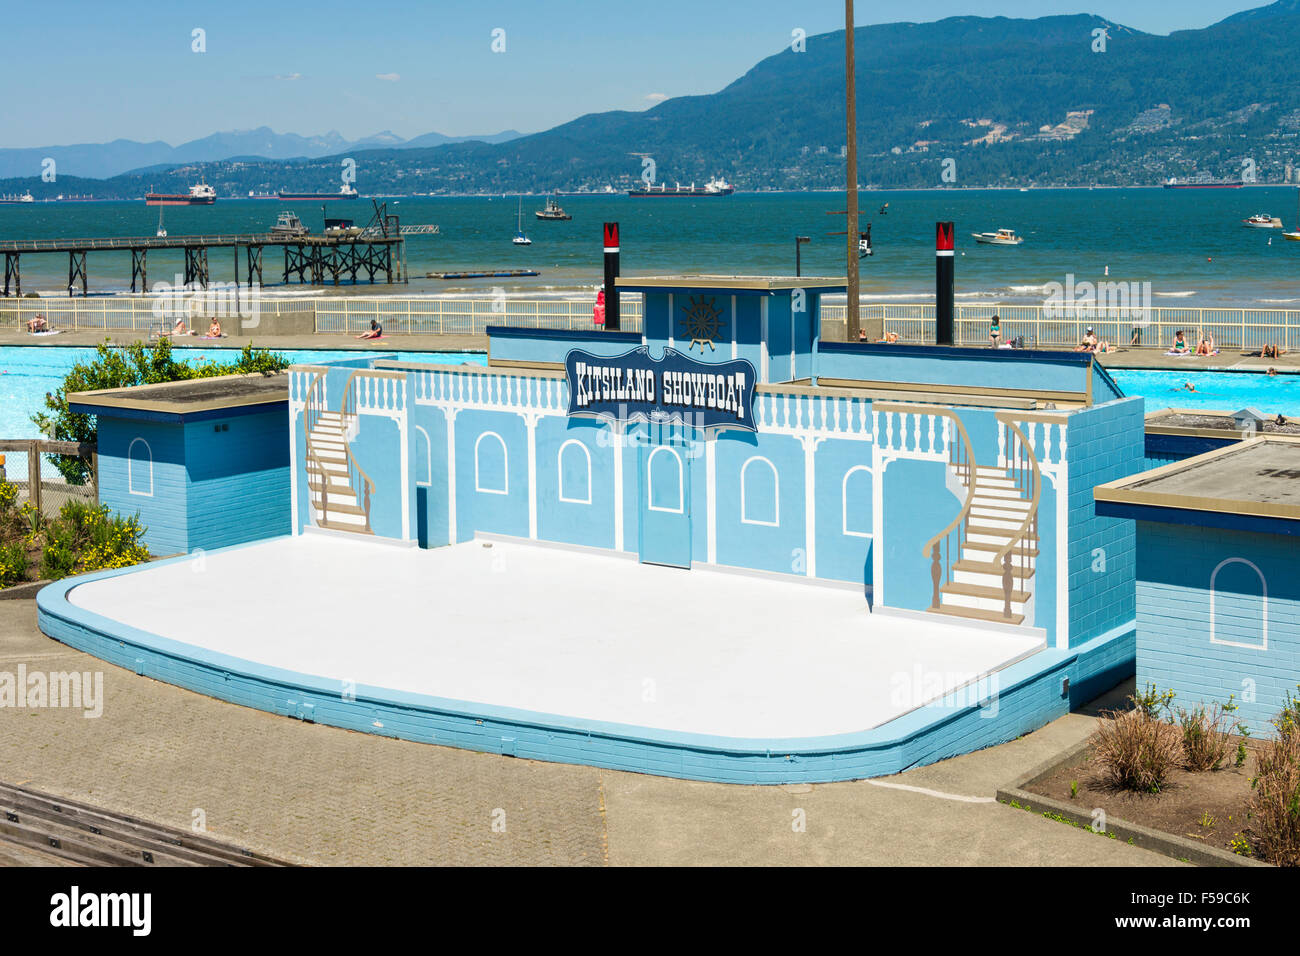 Kitsilano Showboat, at Kitsilano Beach, Vancouver, is an open air amphitheatre. It hosts free performances in summer since 1935. Stock Photo